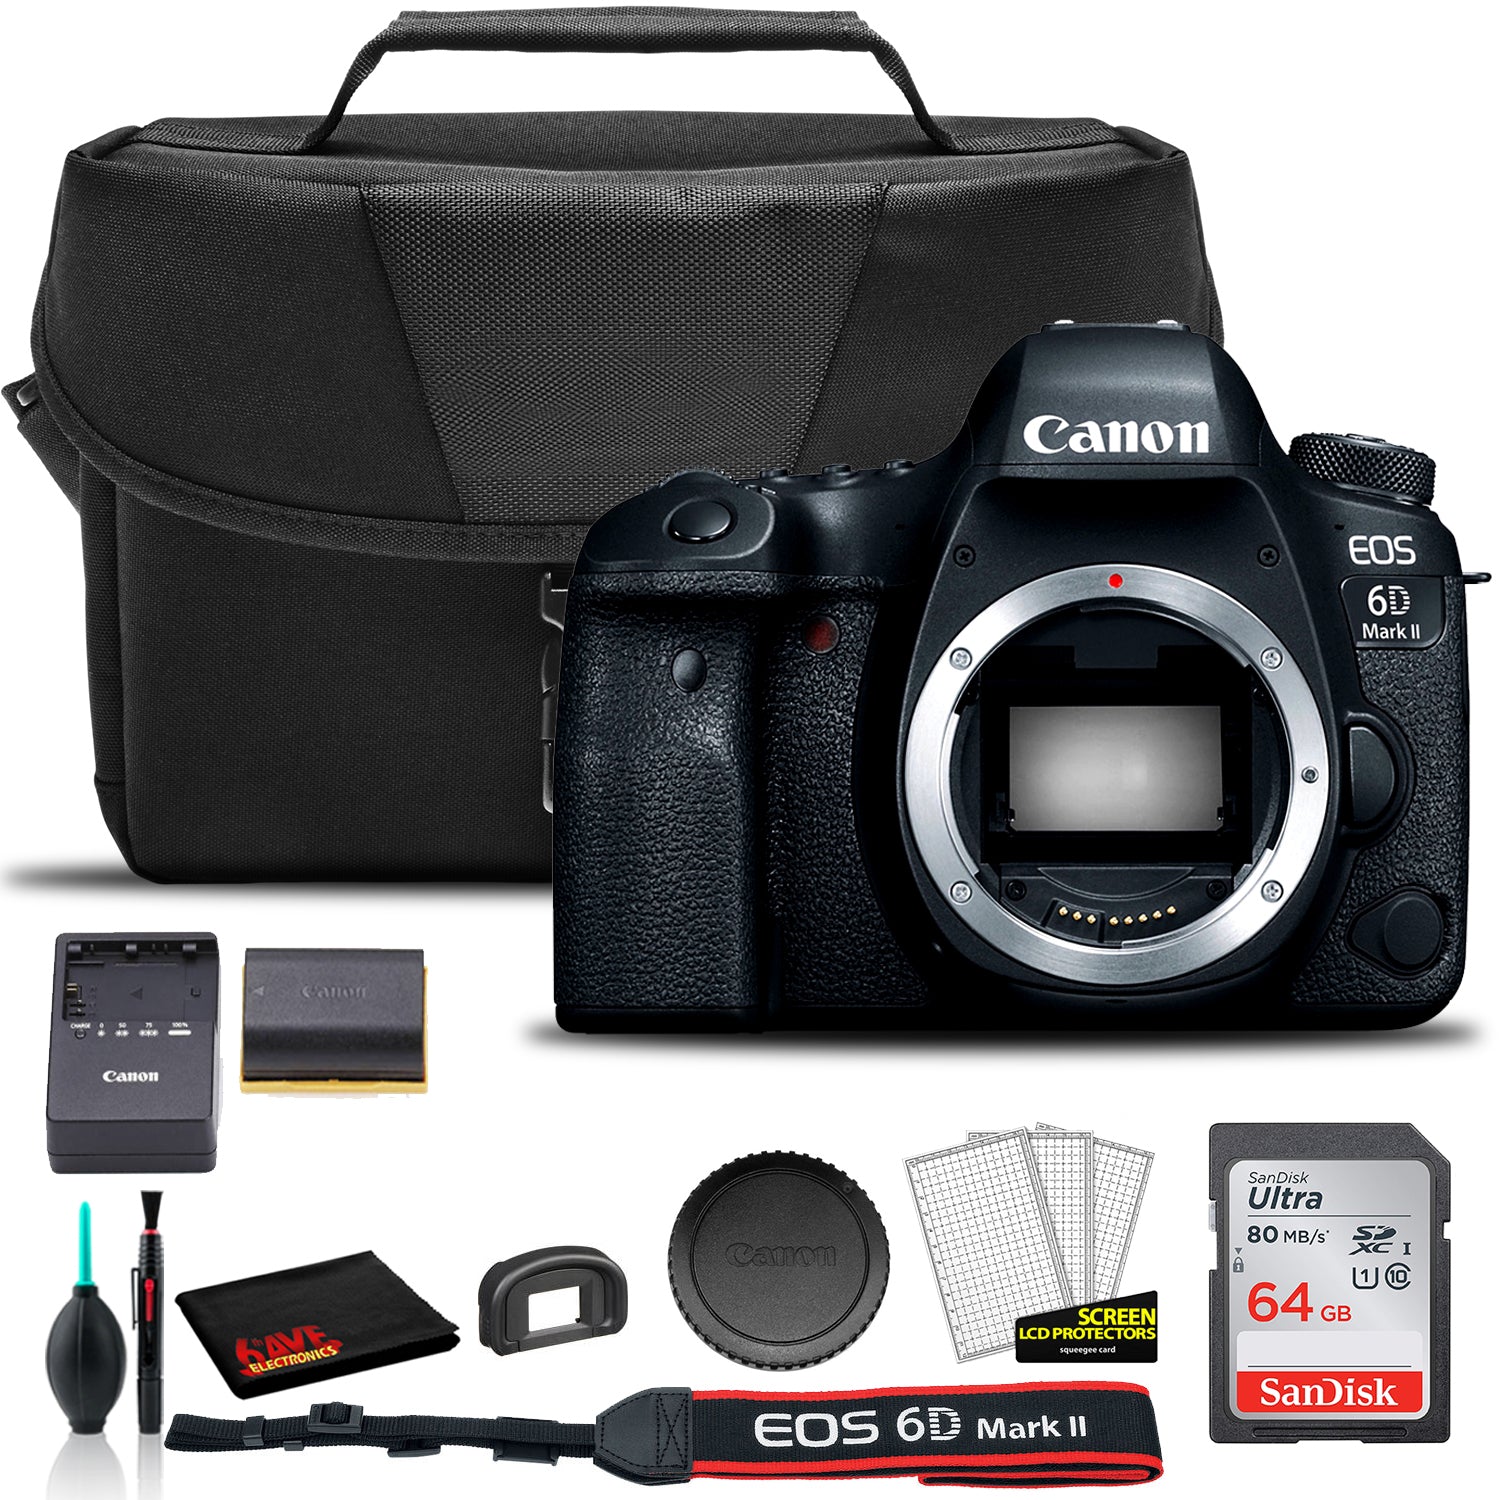 Canon EOS 6D Mark II DSLR Camera (Body Only) (1897C002) +  EOS Bag +  Sandisk Ultra 64GB Card + Cleaning Set And More